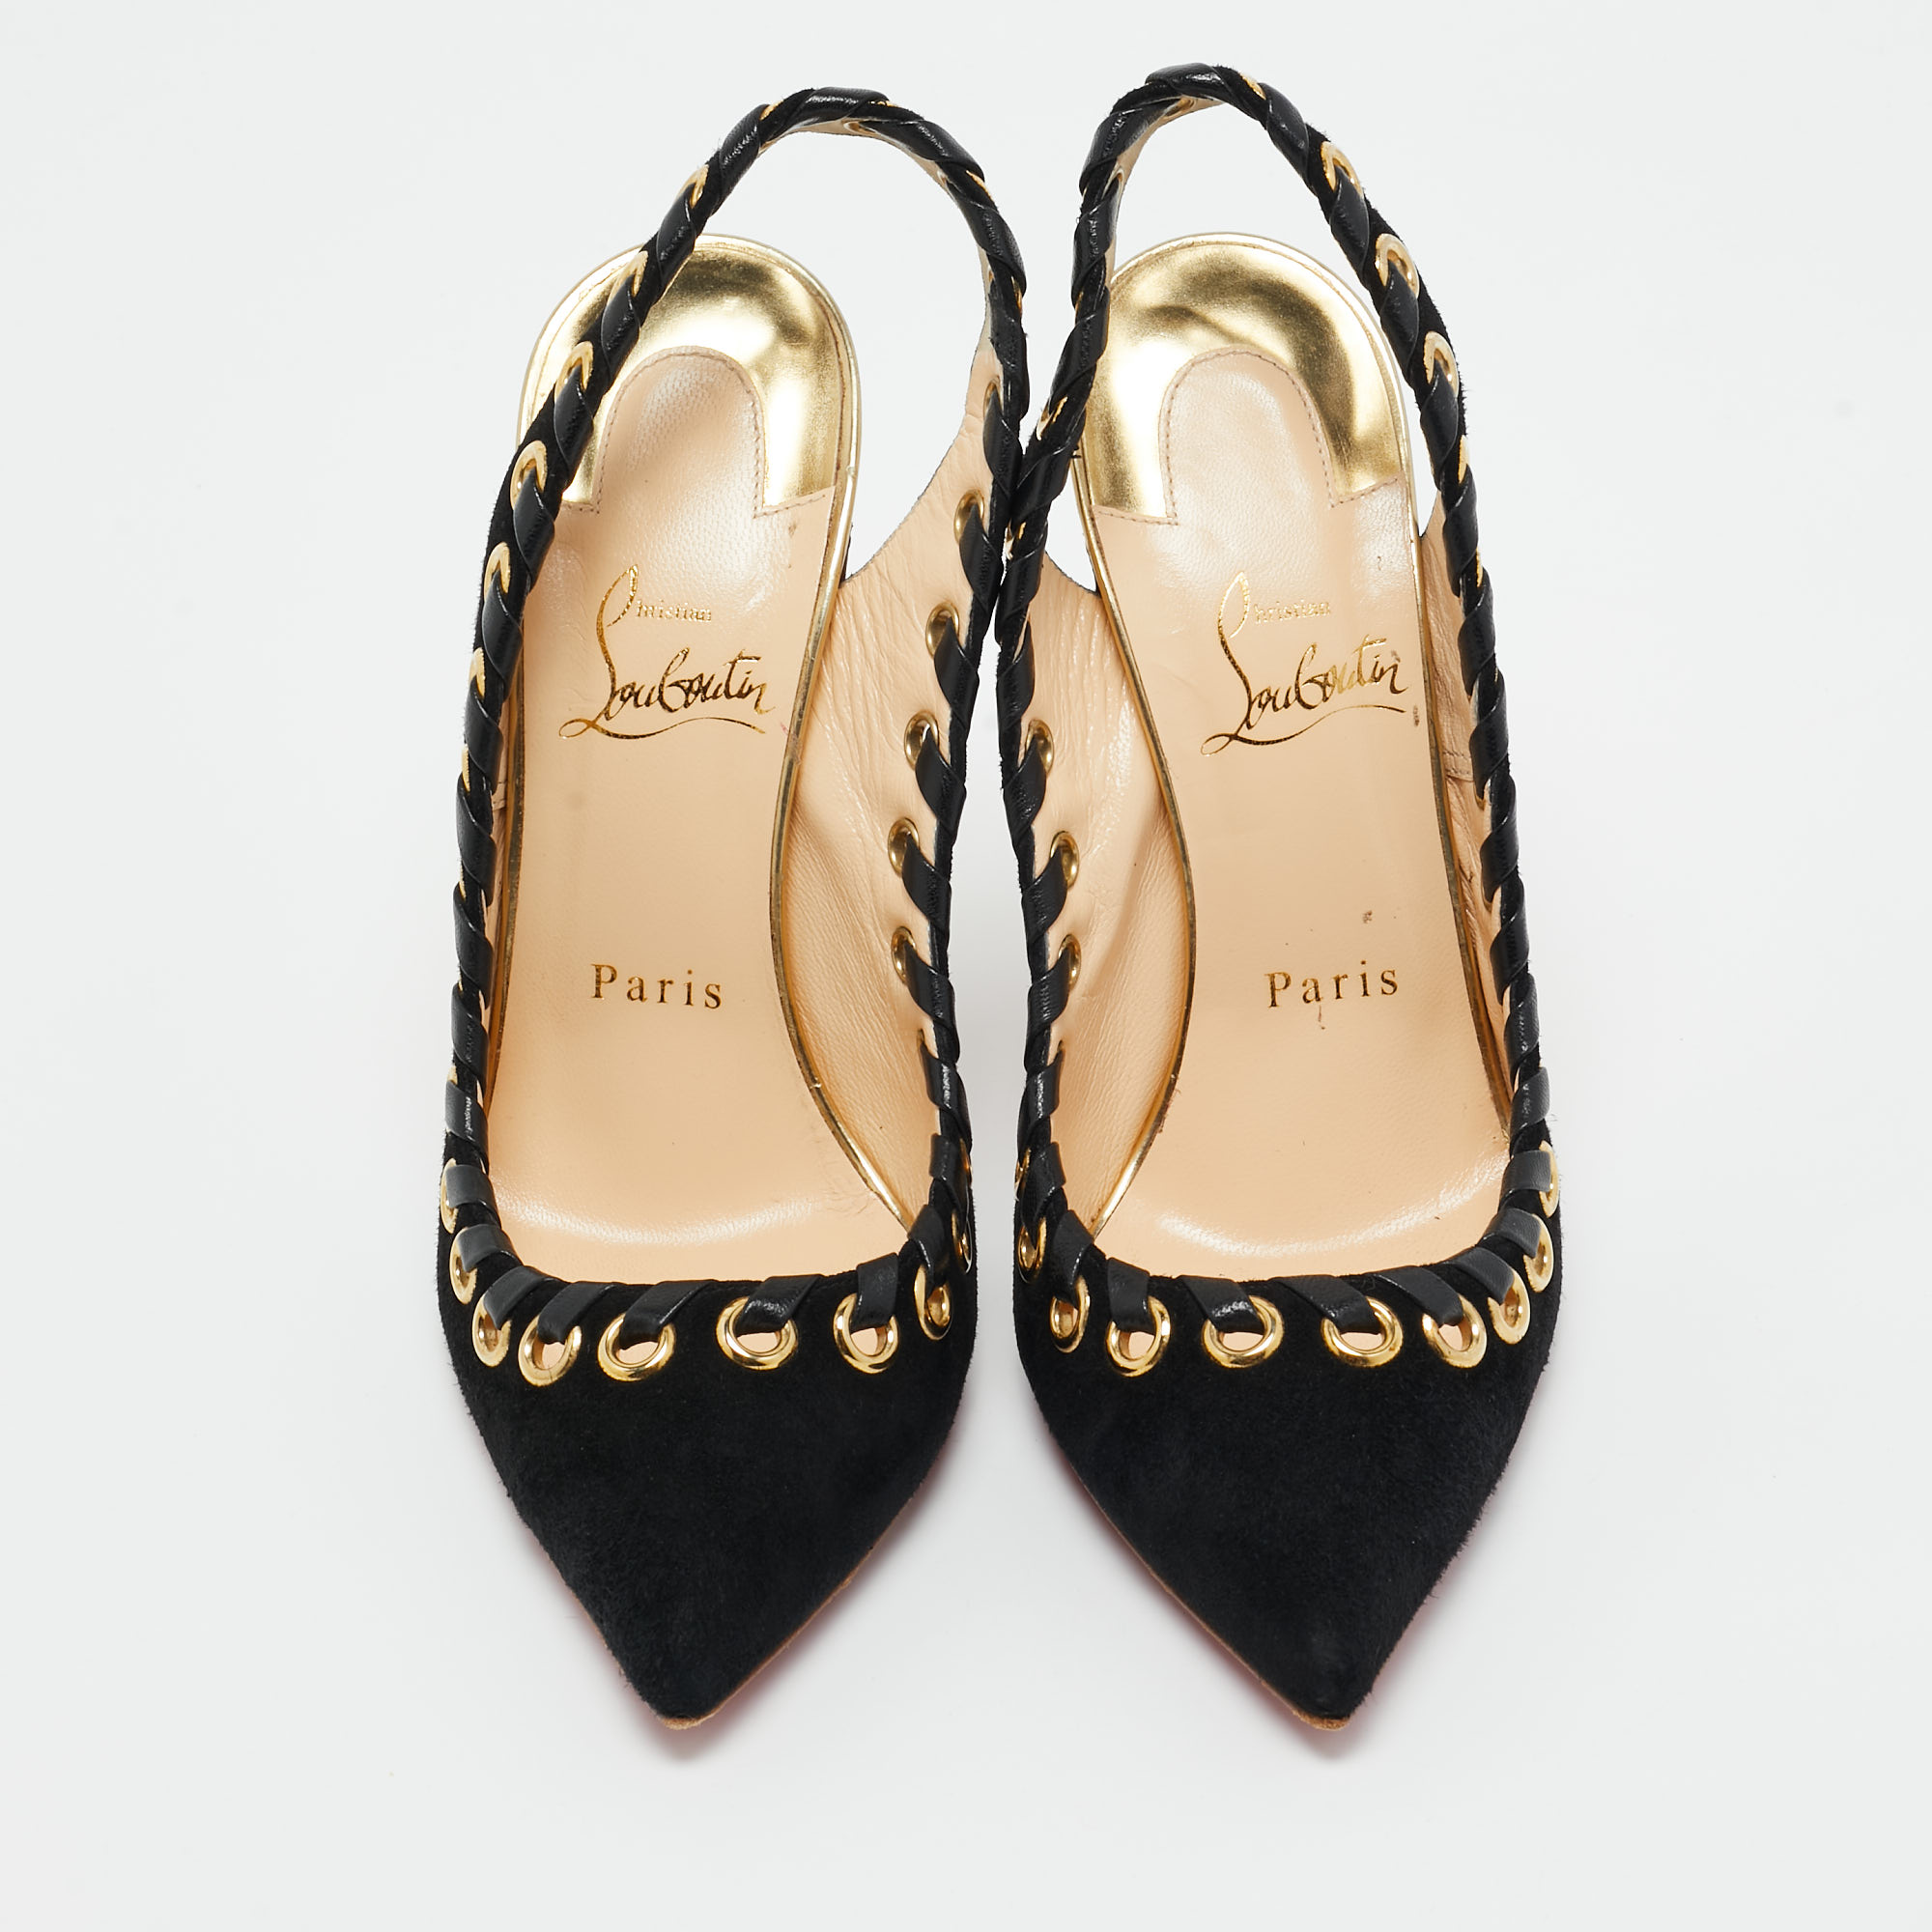 Christian Louboutin Black Suede And Leather Trim Whipstitch Ostri Slingback Pumps Size 38